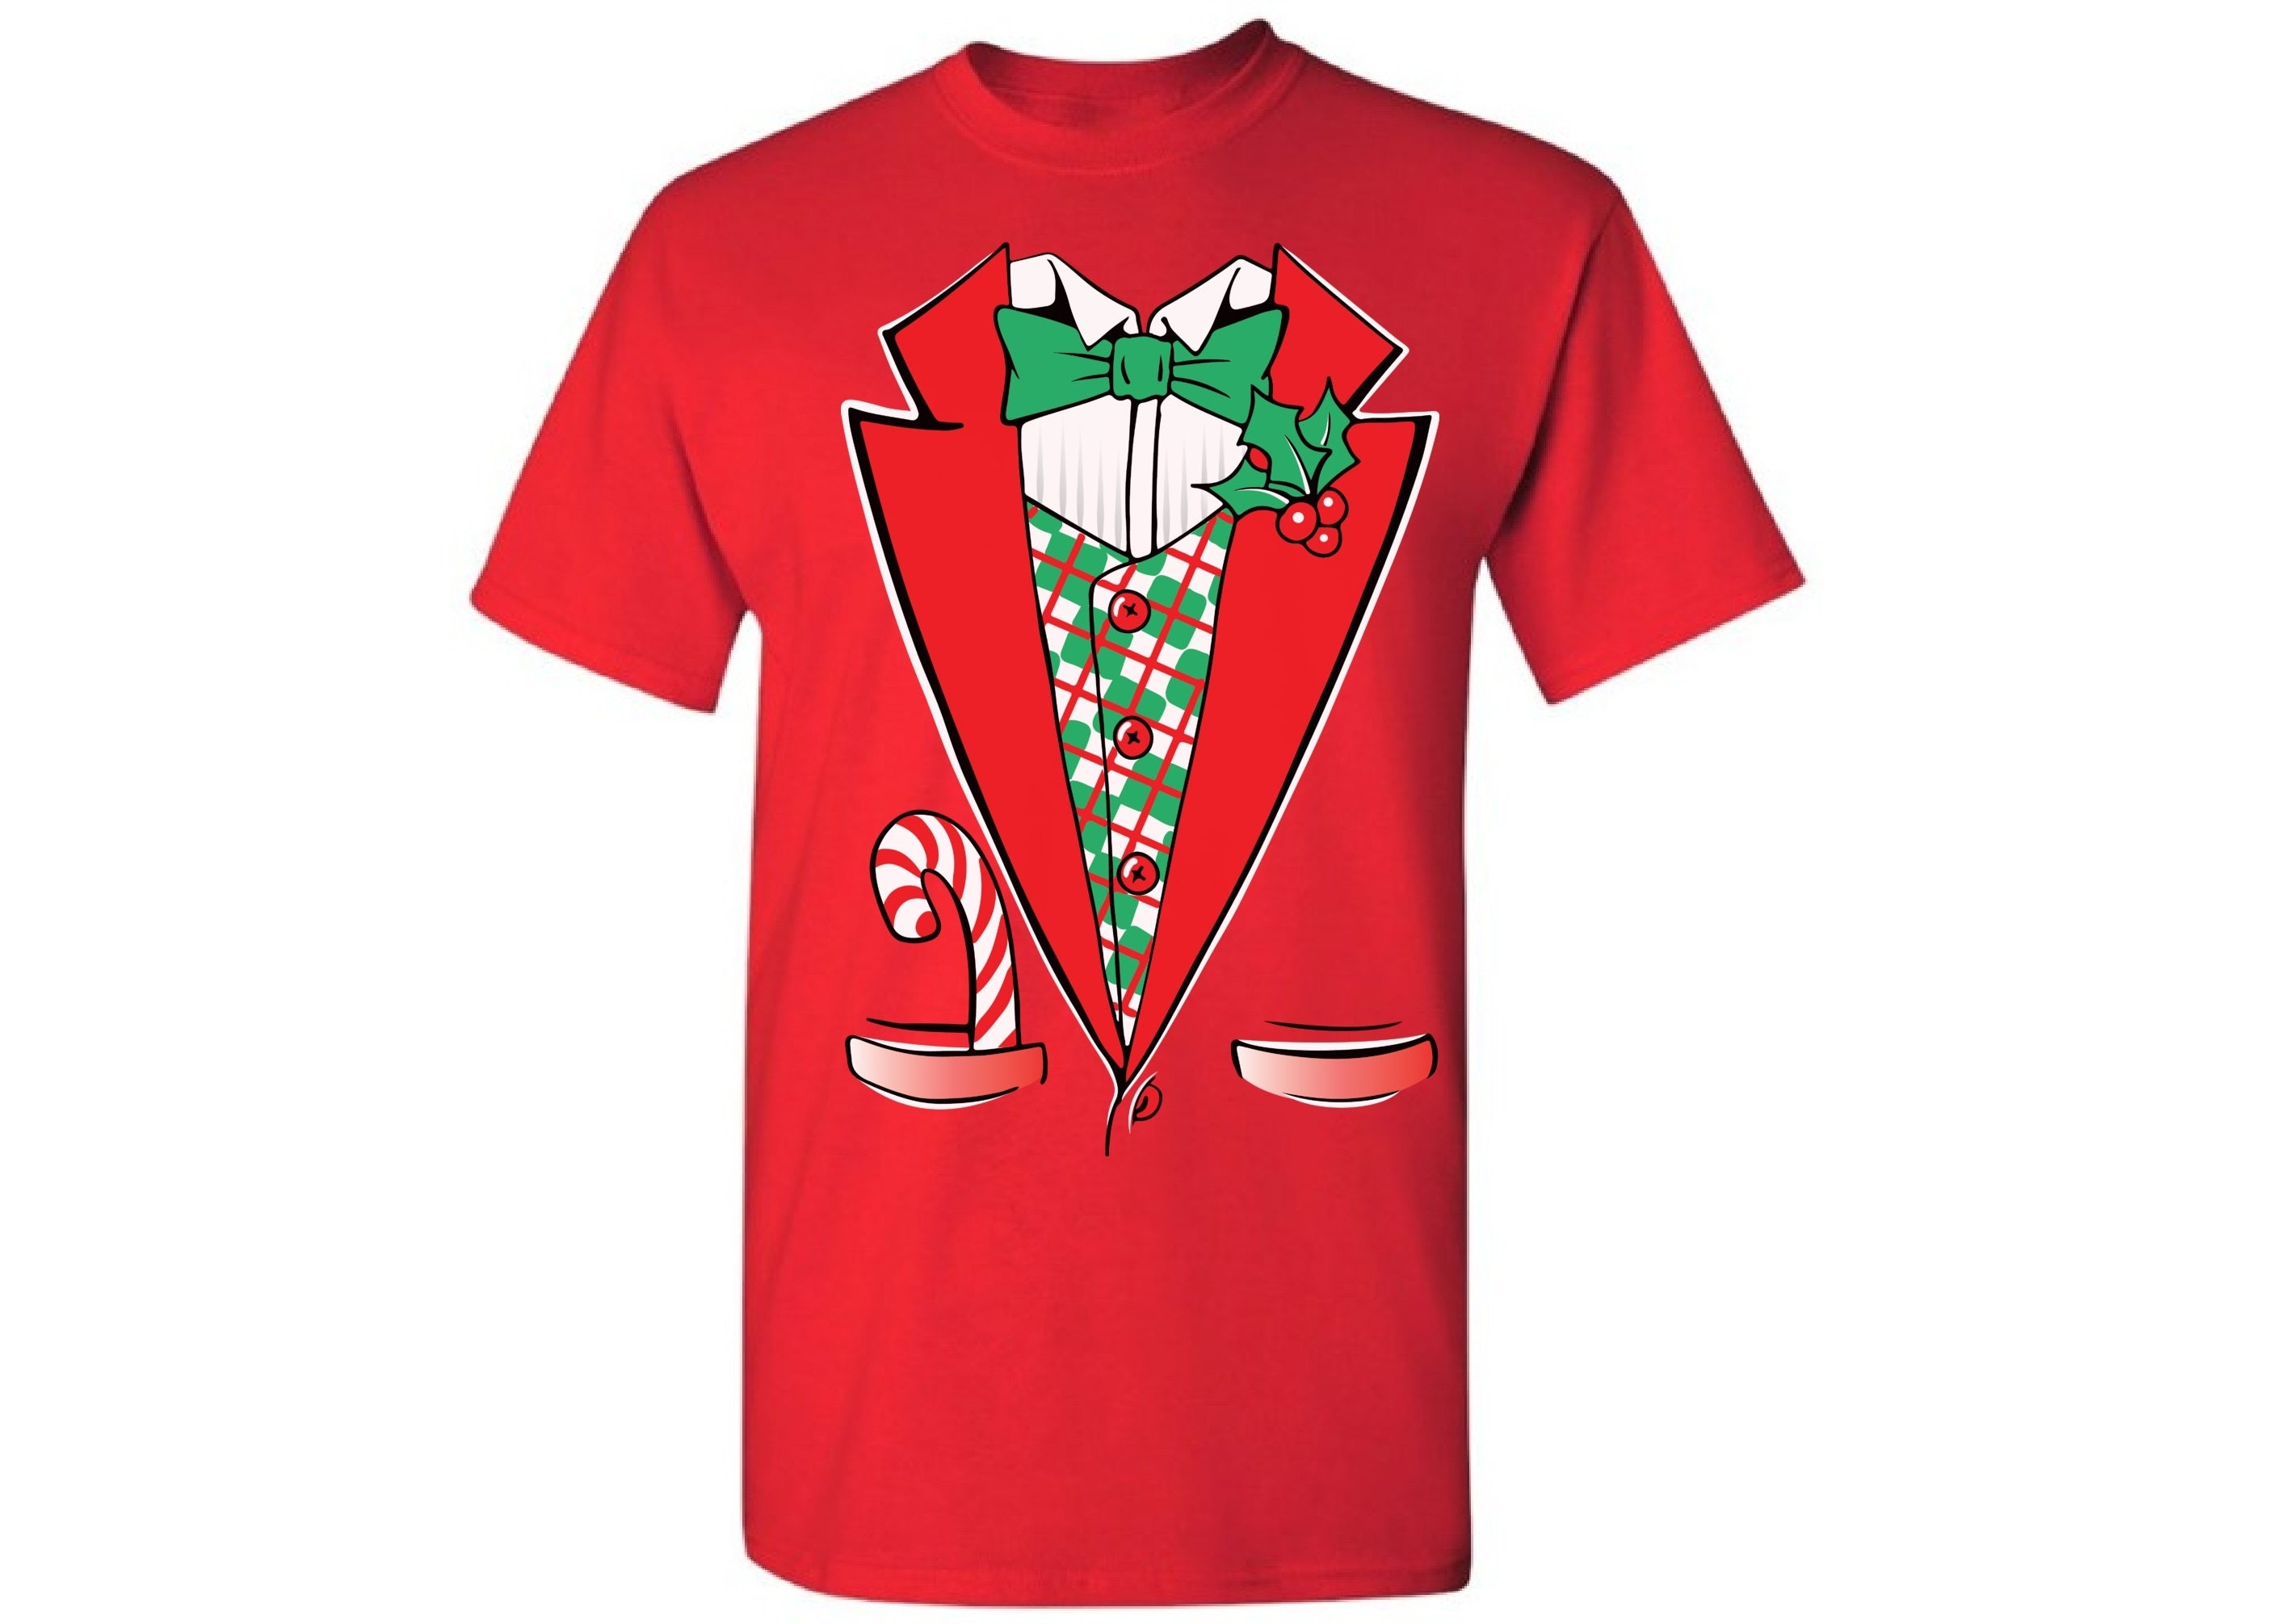 Christmas Tuxedo Shirt Ugly Christmas T-shirt Christmas Tshirts For Men Ugly Christmas Shirt Holiday Top Mens Holiday Tee Gift For Him Plus Size Up To 5xl